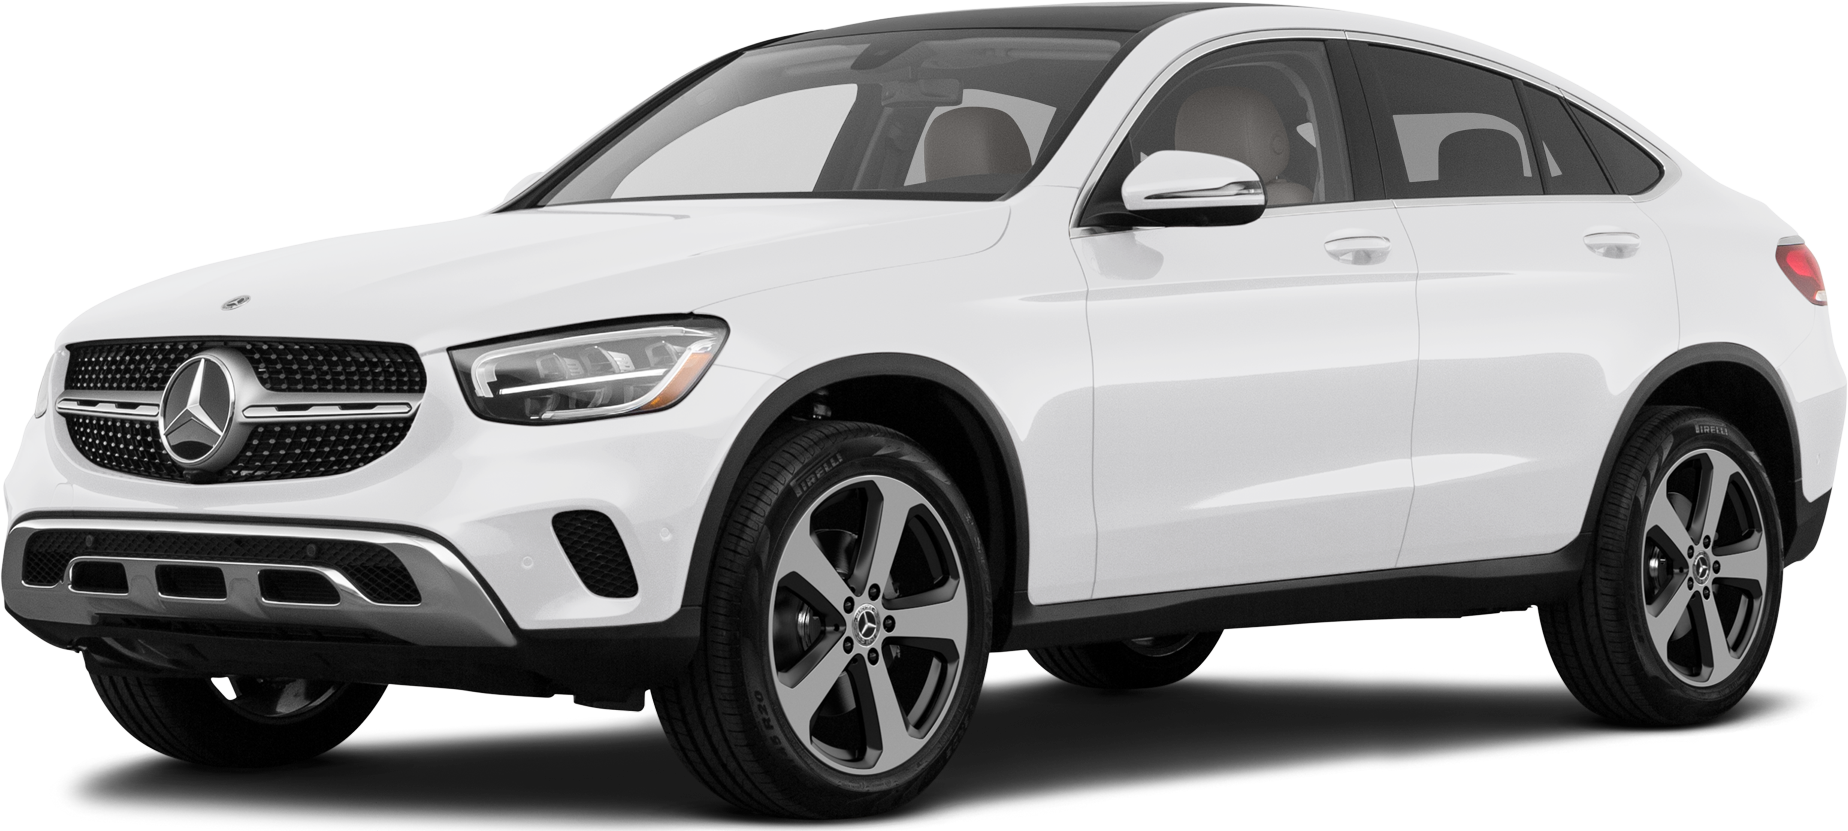 https://file.kelleybluebookimages.com/kbb/base/evox/CP/53045/2023-Mercedes-Benz-GLC%20Coupe-front_53045_032_1848x831_149_cropped.png